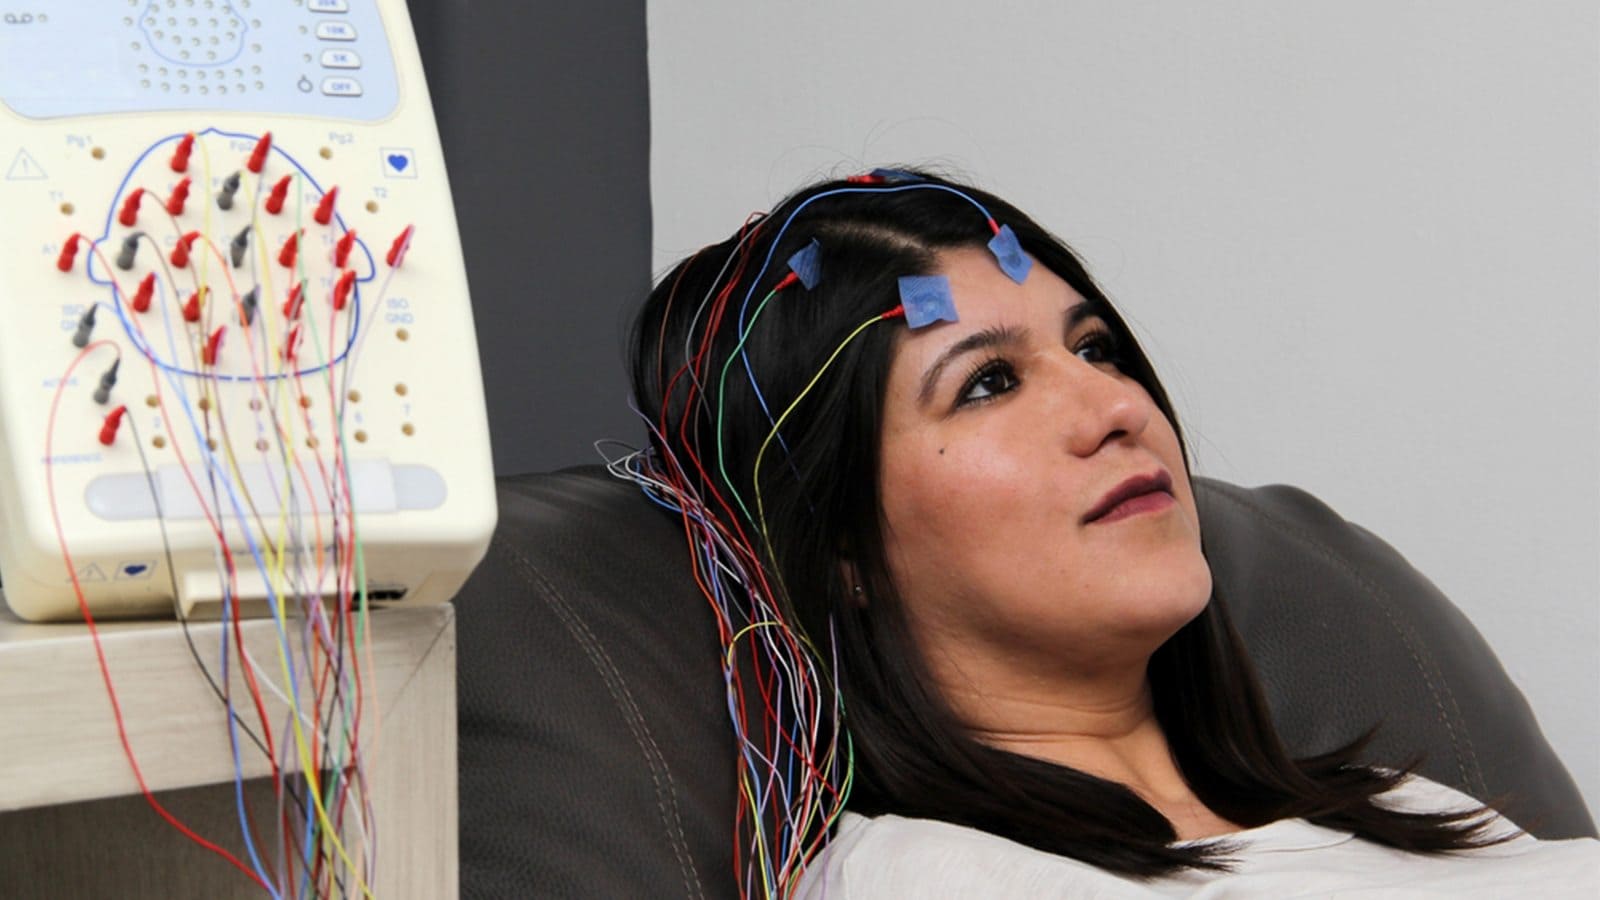 A woman on an EEG test at home